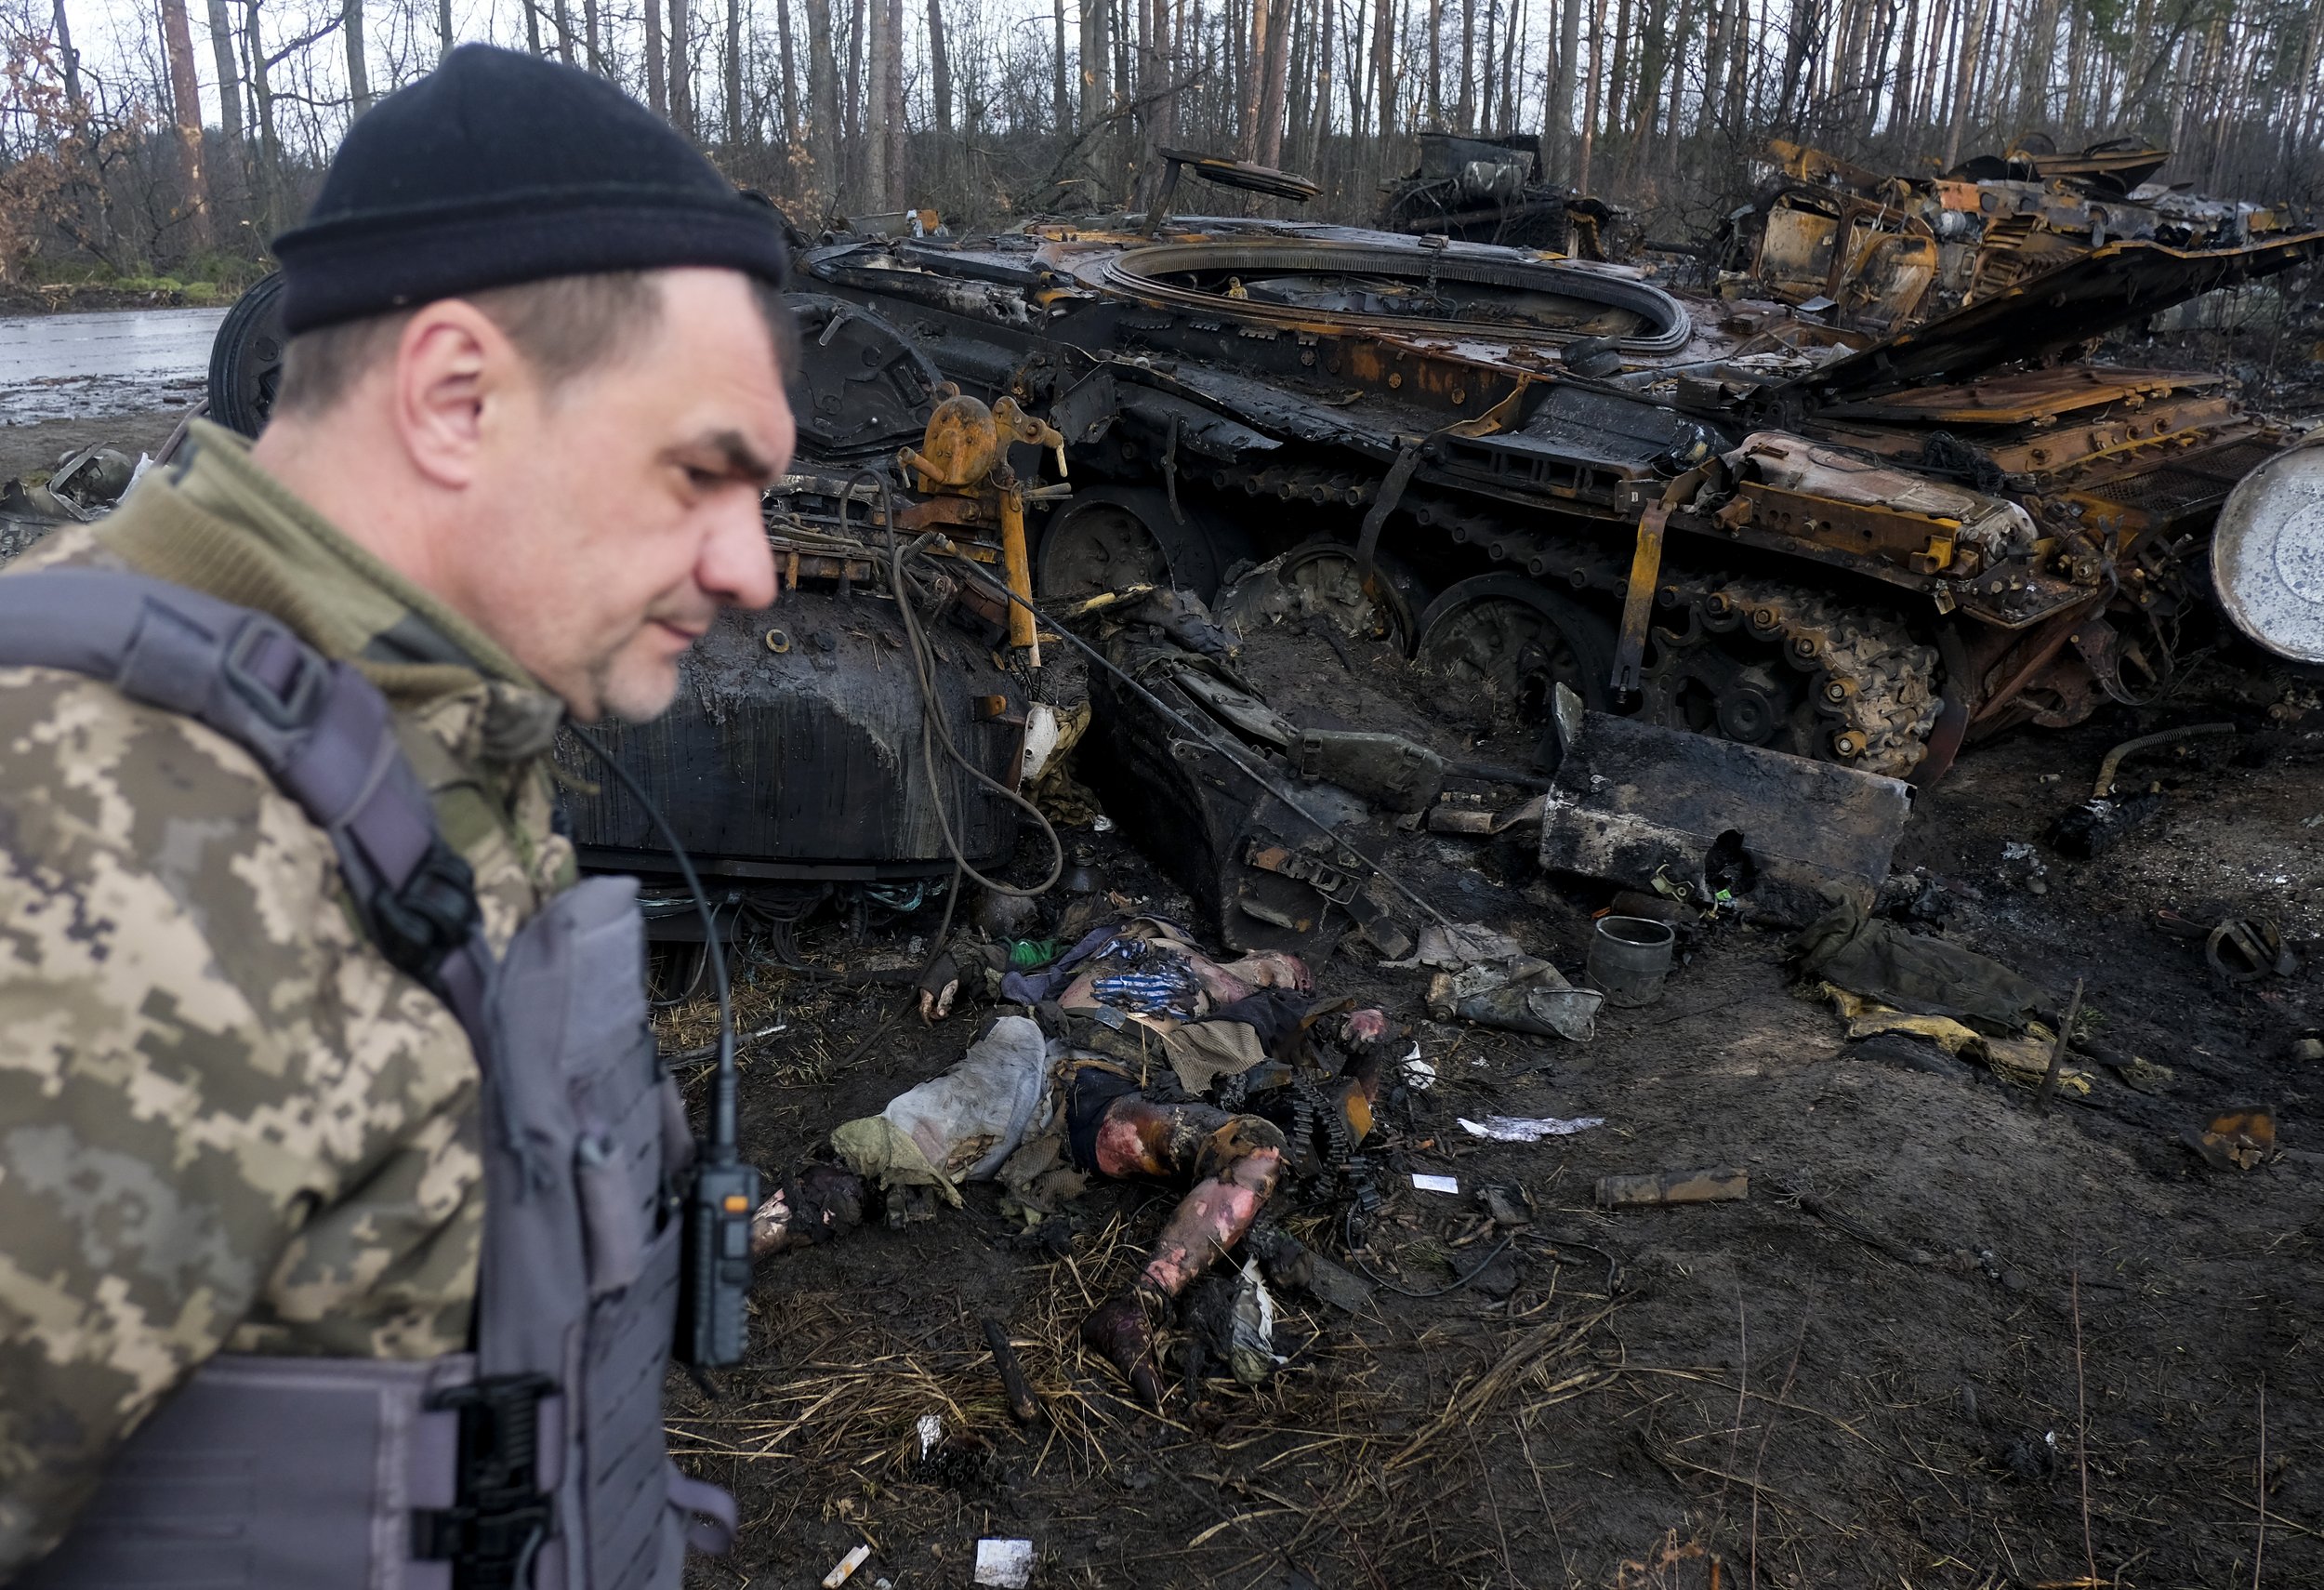  A Ukrainian soldier walks past the corpse of a dead Russian soldier at the scene of an ambush on a Russian armored column on the outskirts of Bucha on April 3, 2022. Ambushes like this by Ukrainian volunteer units and soldiers armed with Javelin mis